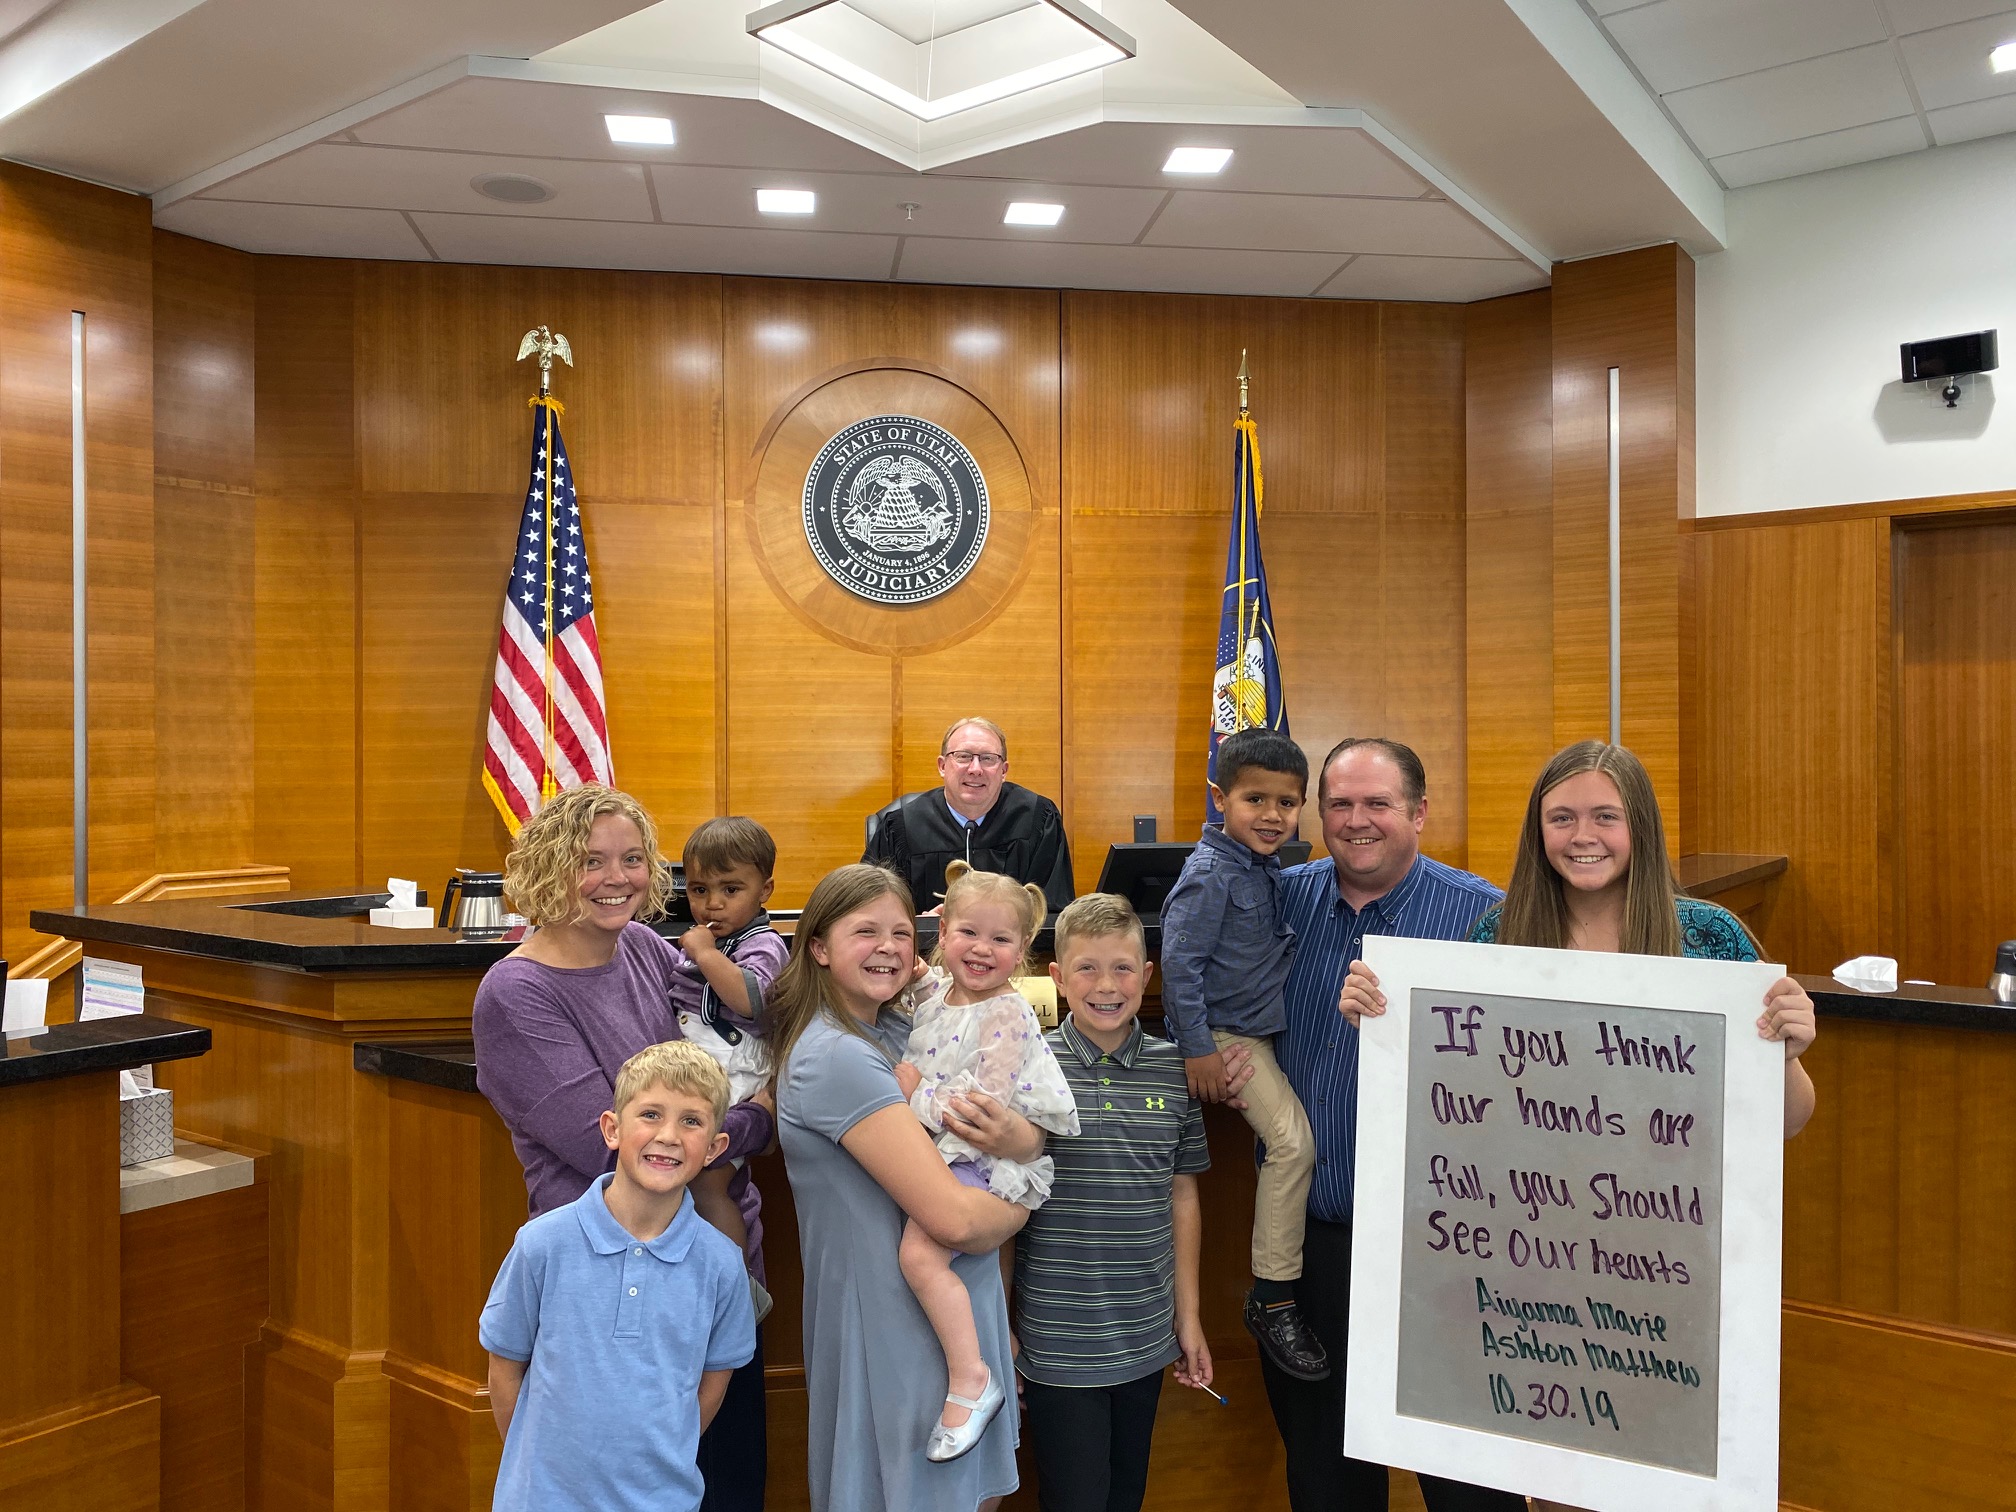 Adoption Day for the Dart family in Price